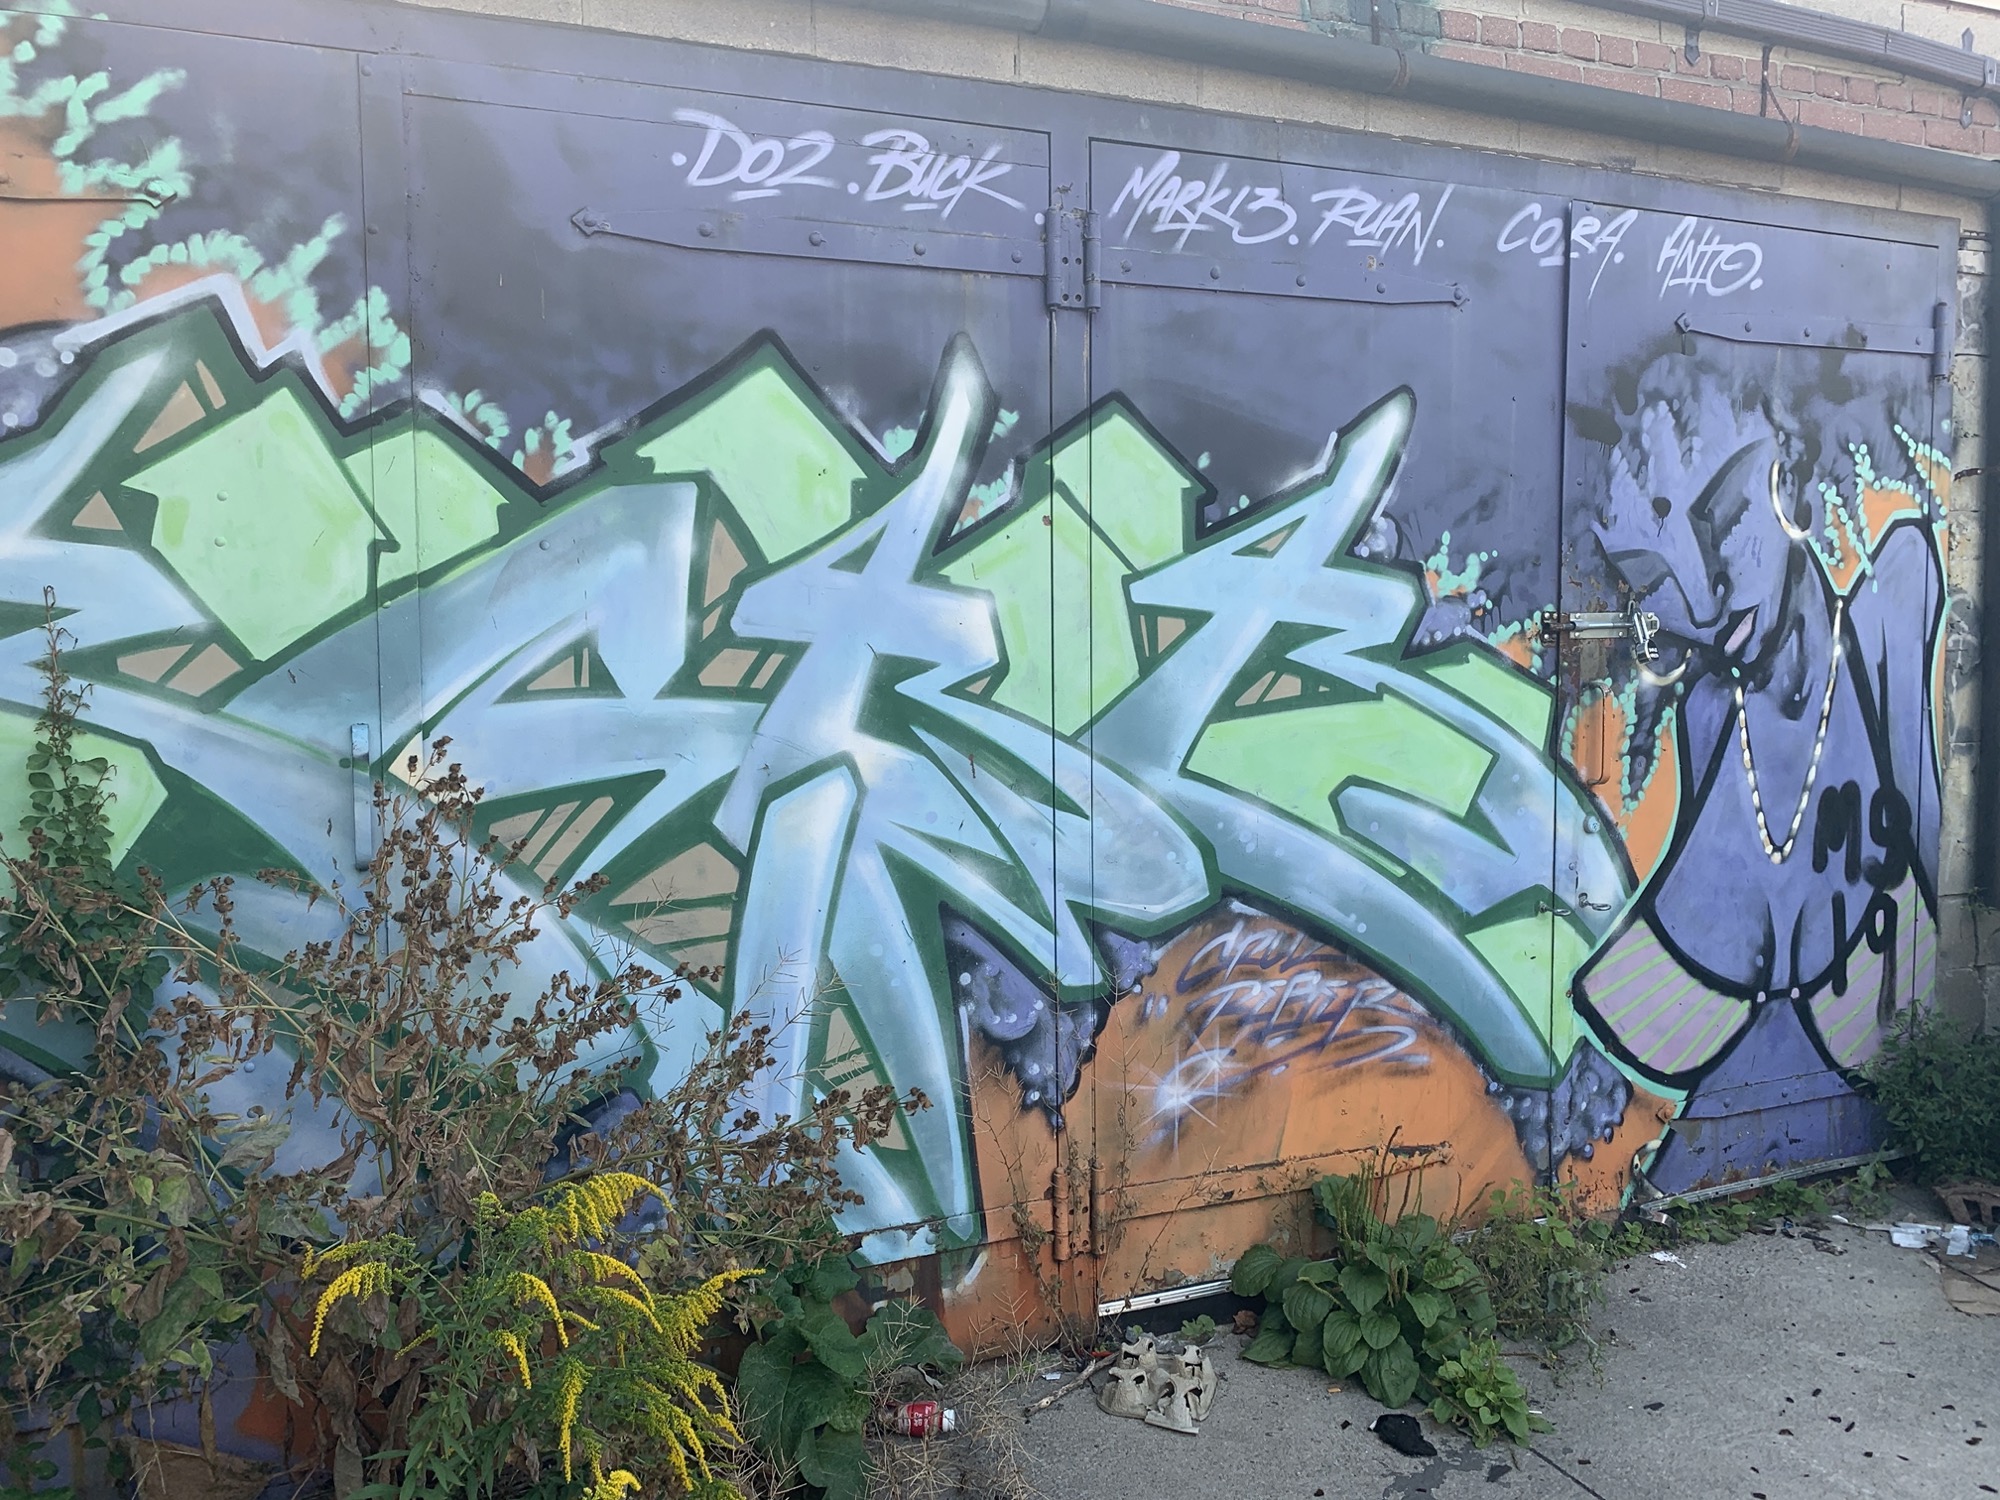 Graffiti 2425  captured by Rabot in Toronto Canada